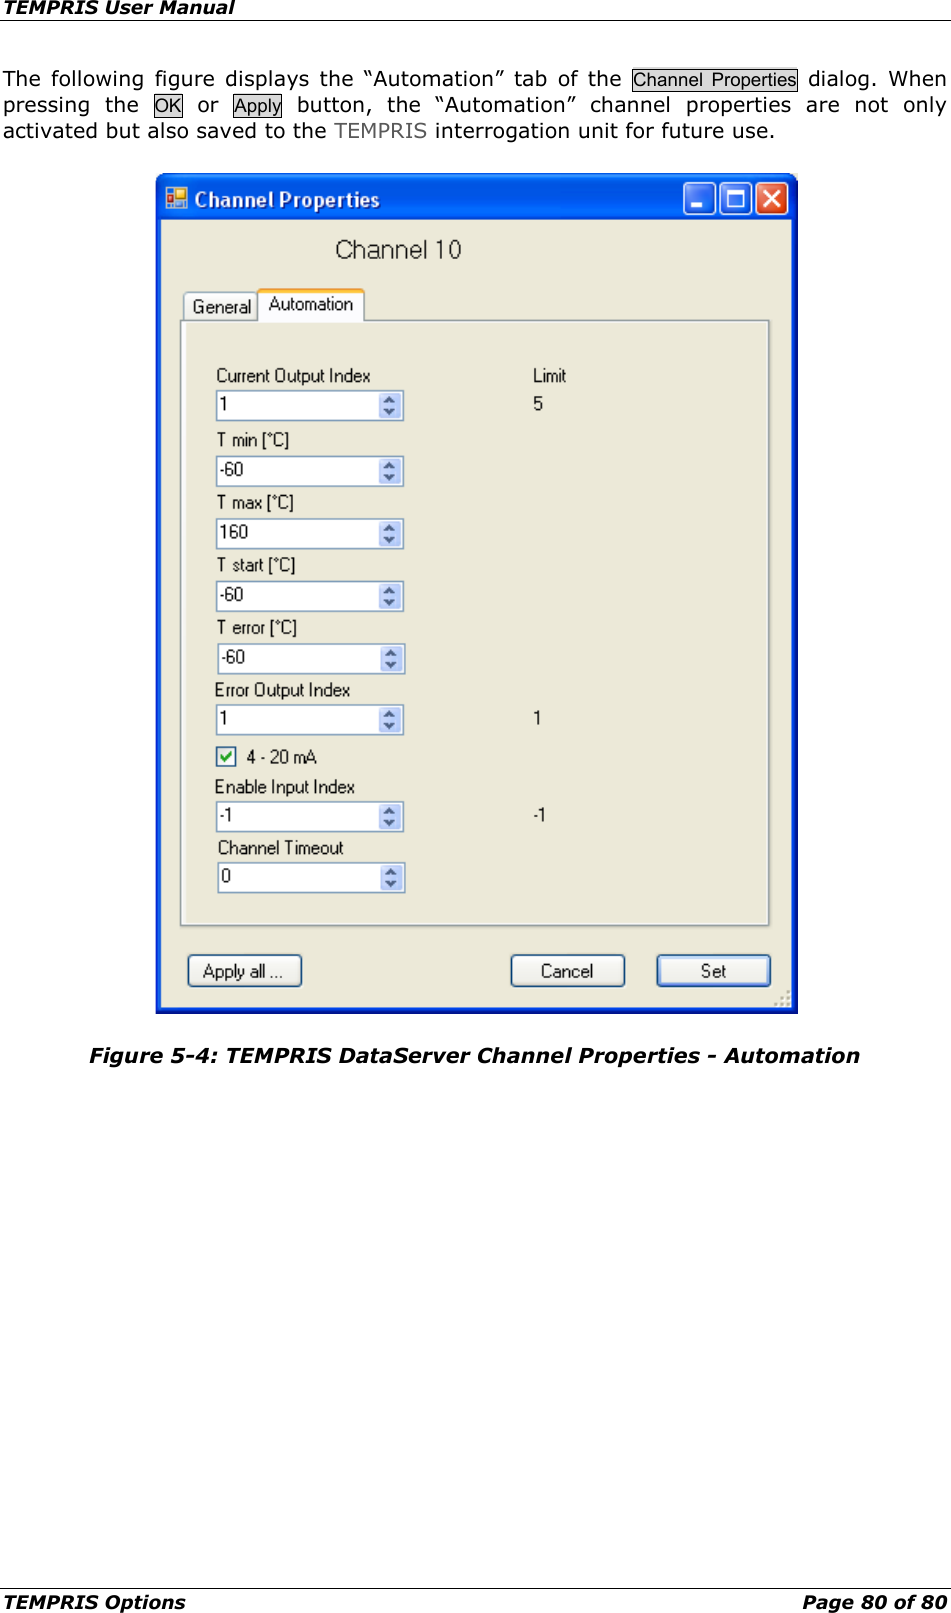 TEMPRIS User Manual TEMPRIS Options    Page 80 of 80 The following figure displays the “Automation” tab of the Channel Properties dialog. When pressing the OK or  Apply button, the “Automation” channel properties are not only activated but also saved to the TEMPRIS interrogation unit for future use.  Figure 5-4: TEMPRIS DataServer Channel Properties - Automation  